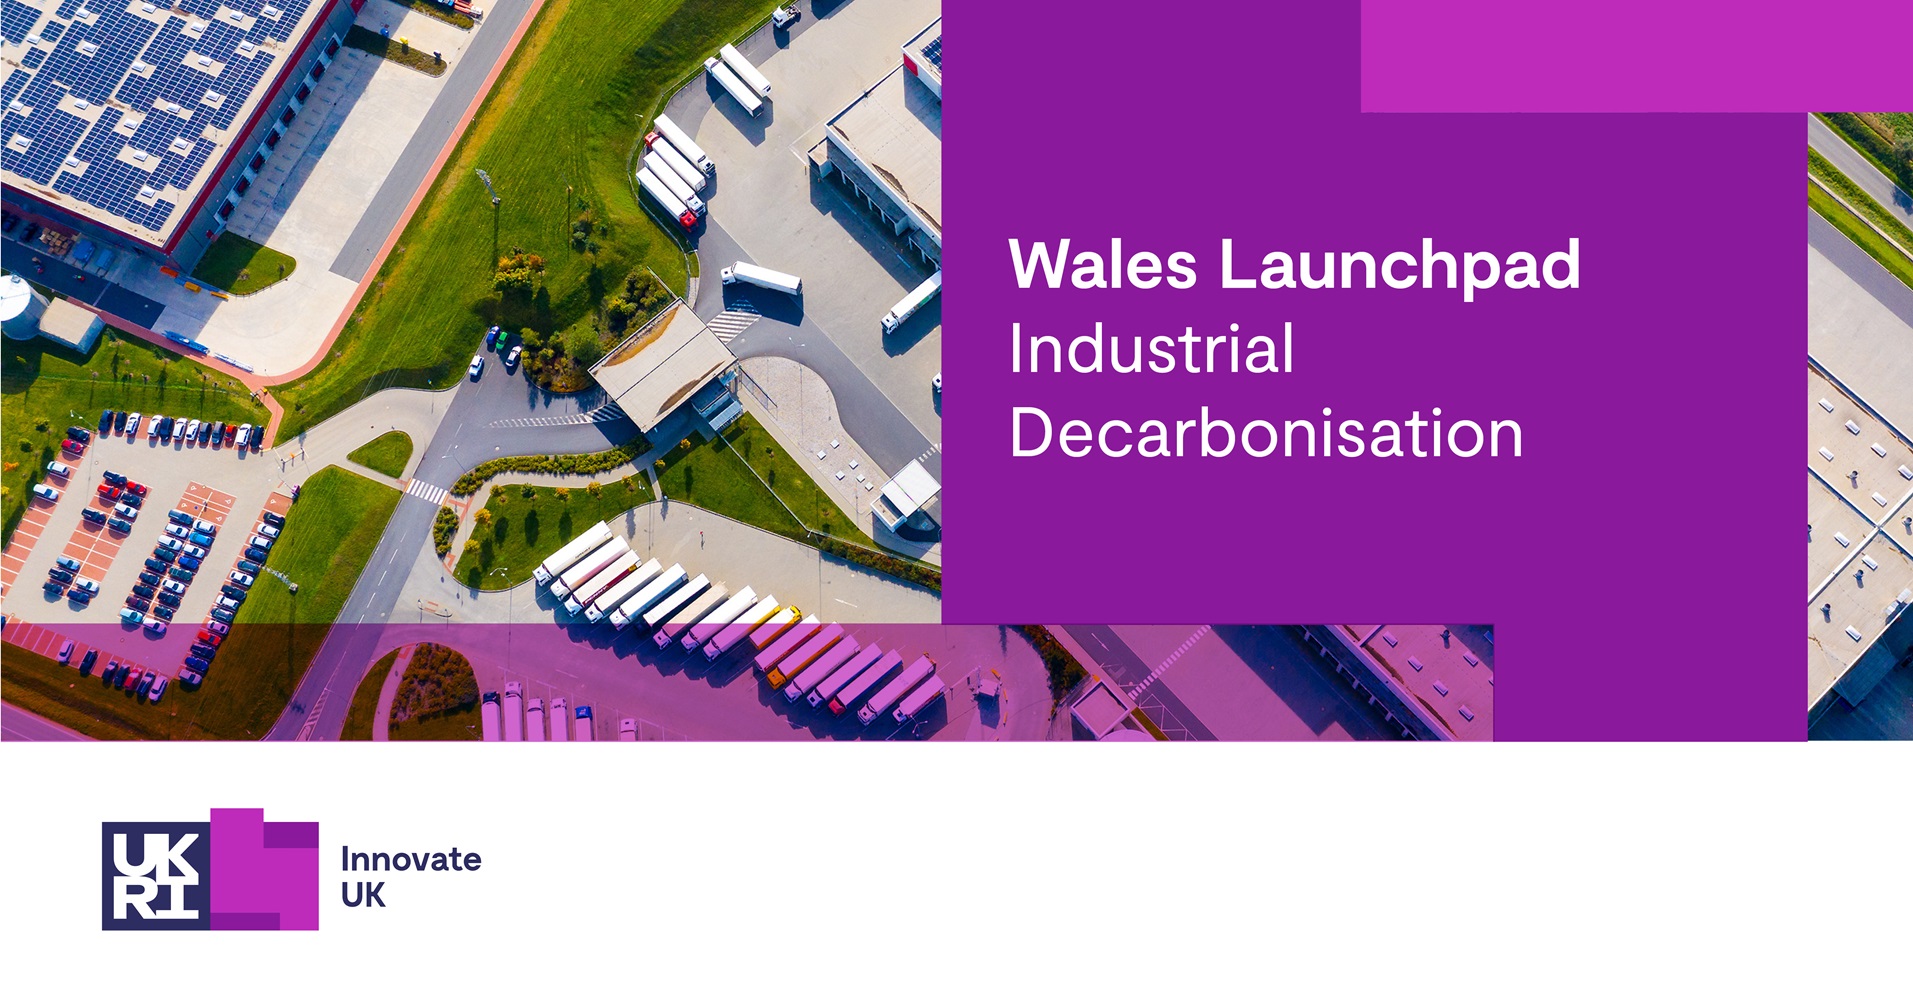 Wales Launchpad Industrial Decarbonisation